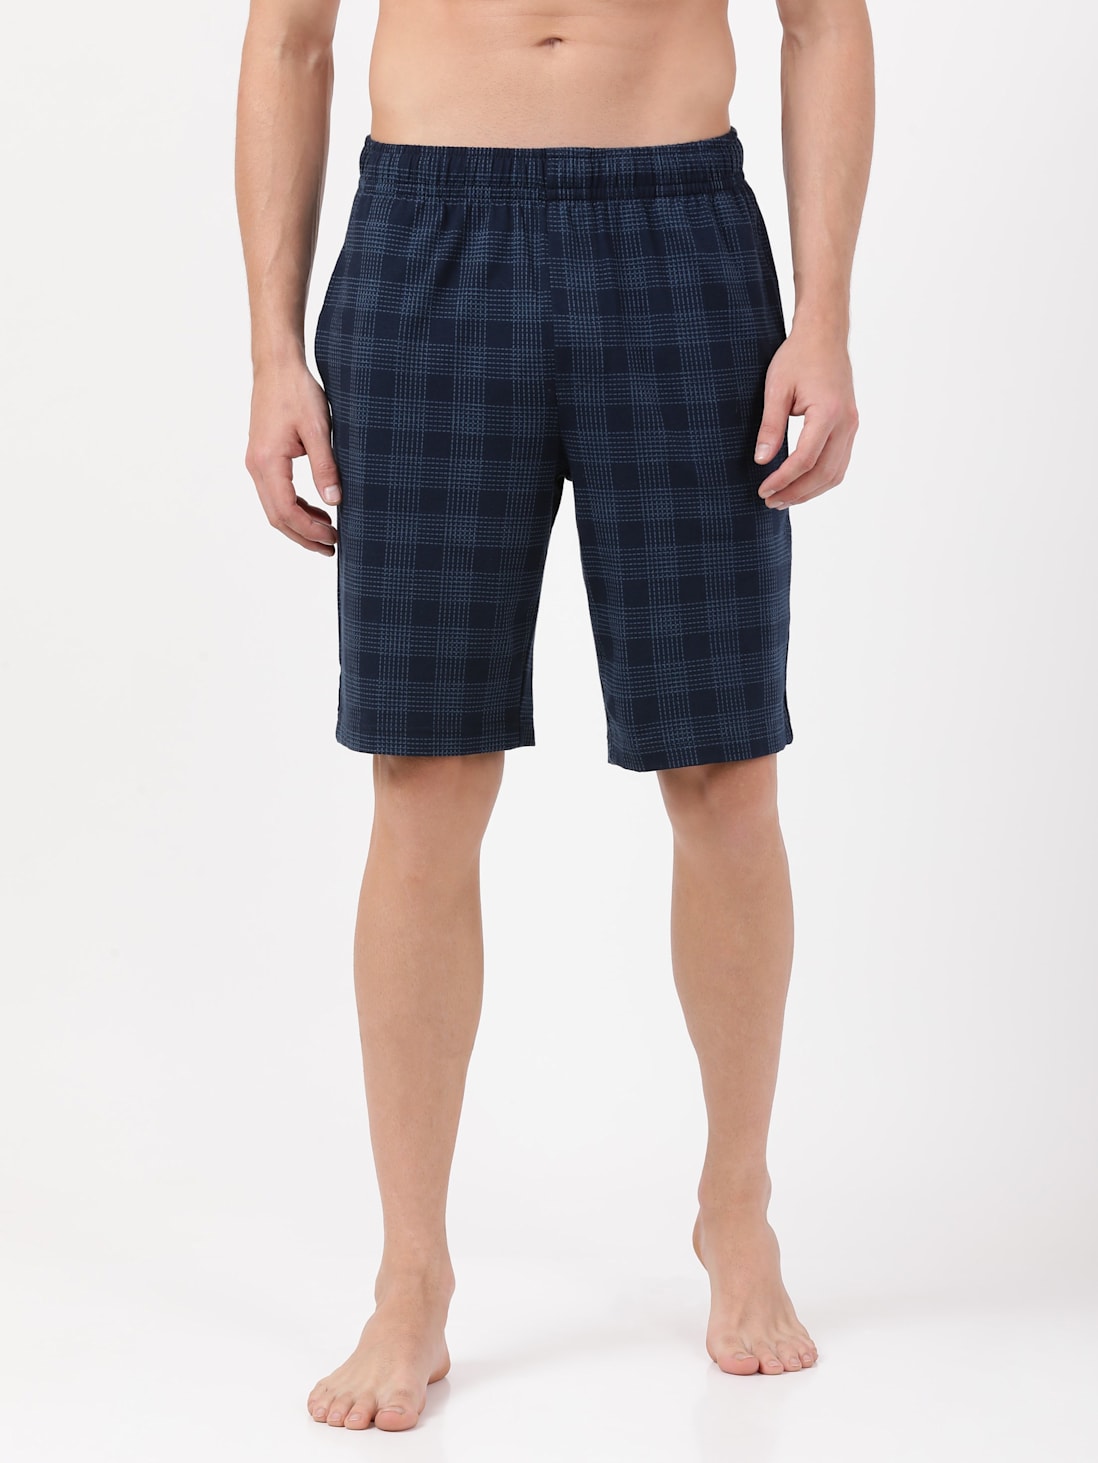 Men's Super Combed Cotton Elastane Stretch Regular Fit Checkered Shorts  with Side Pockets - Navy